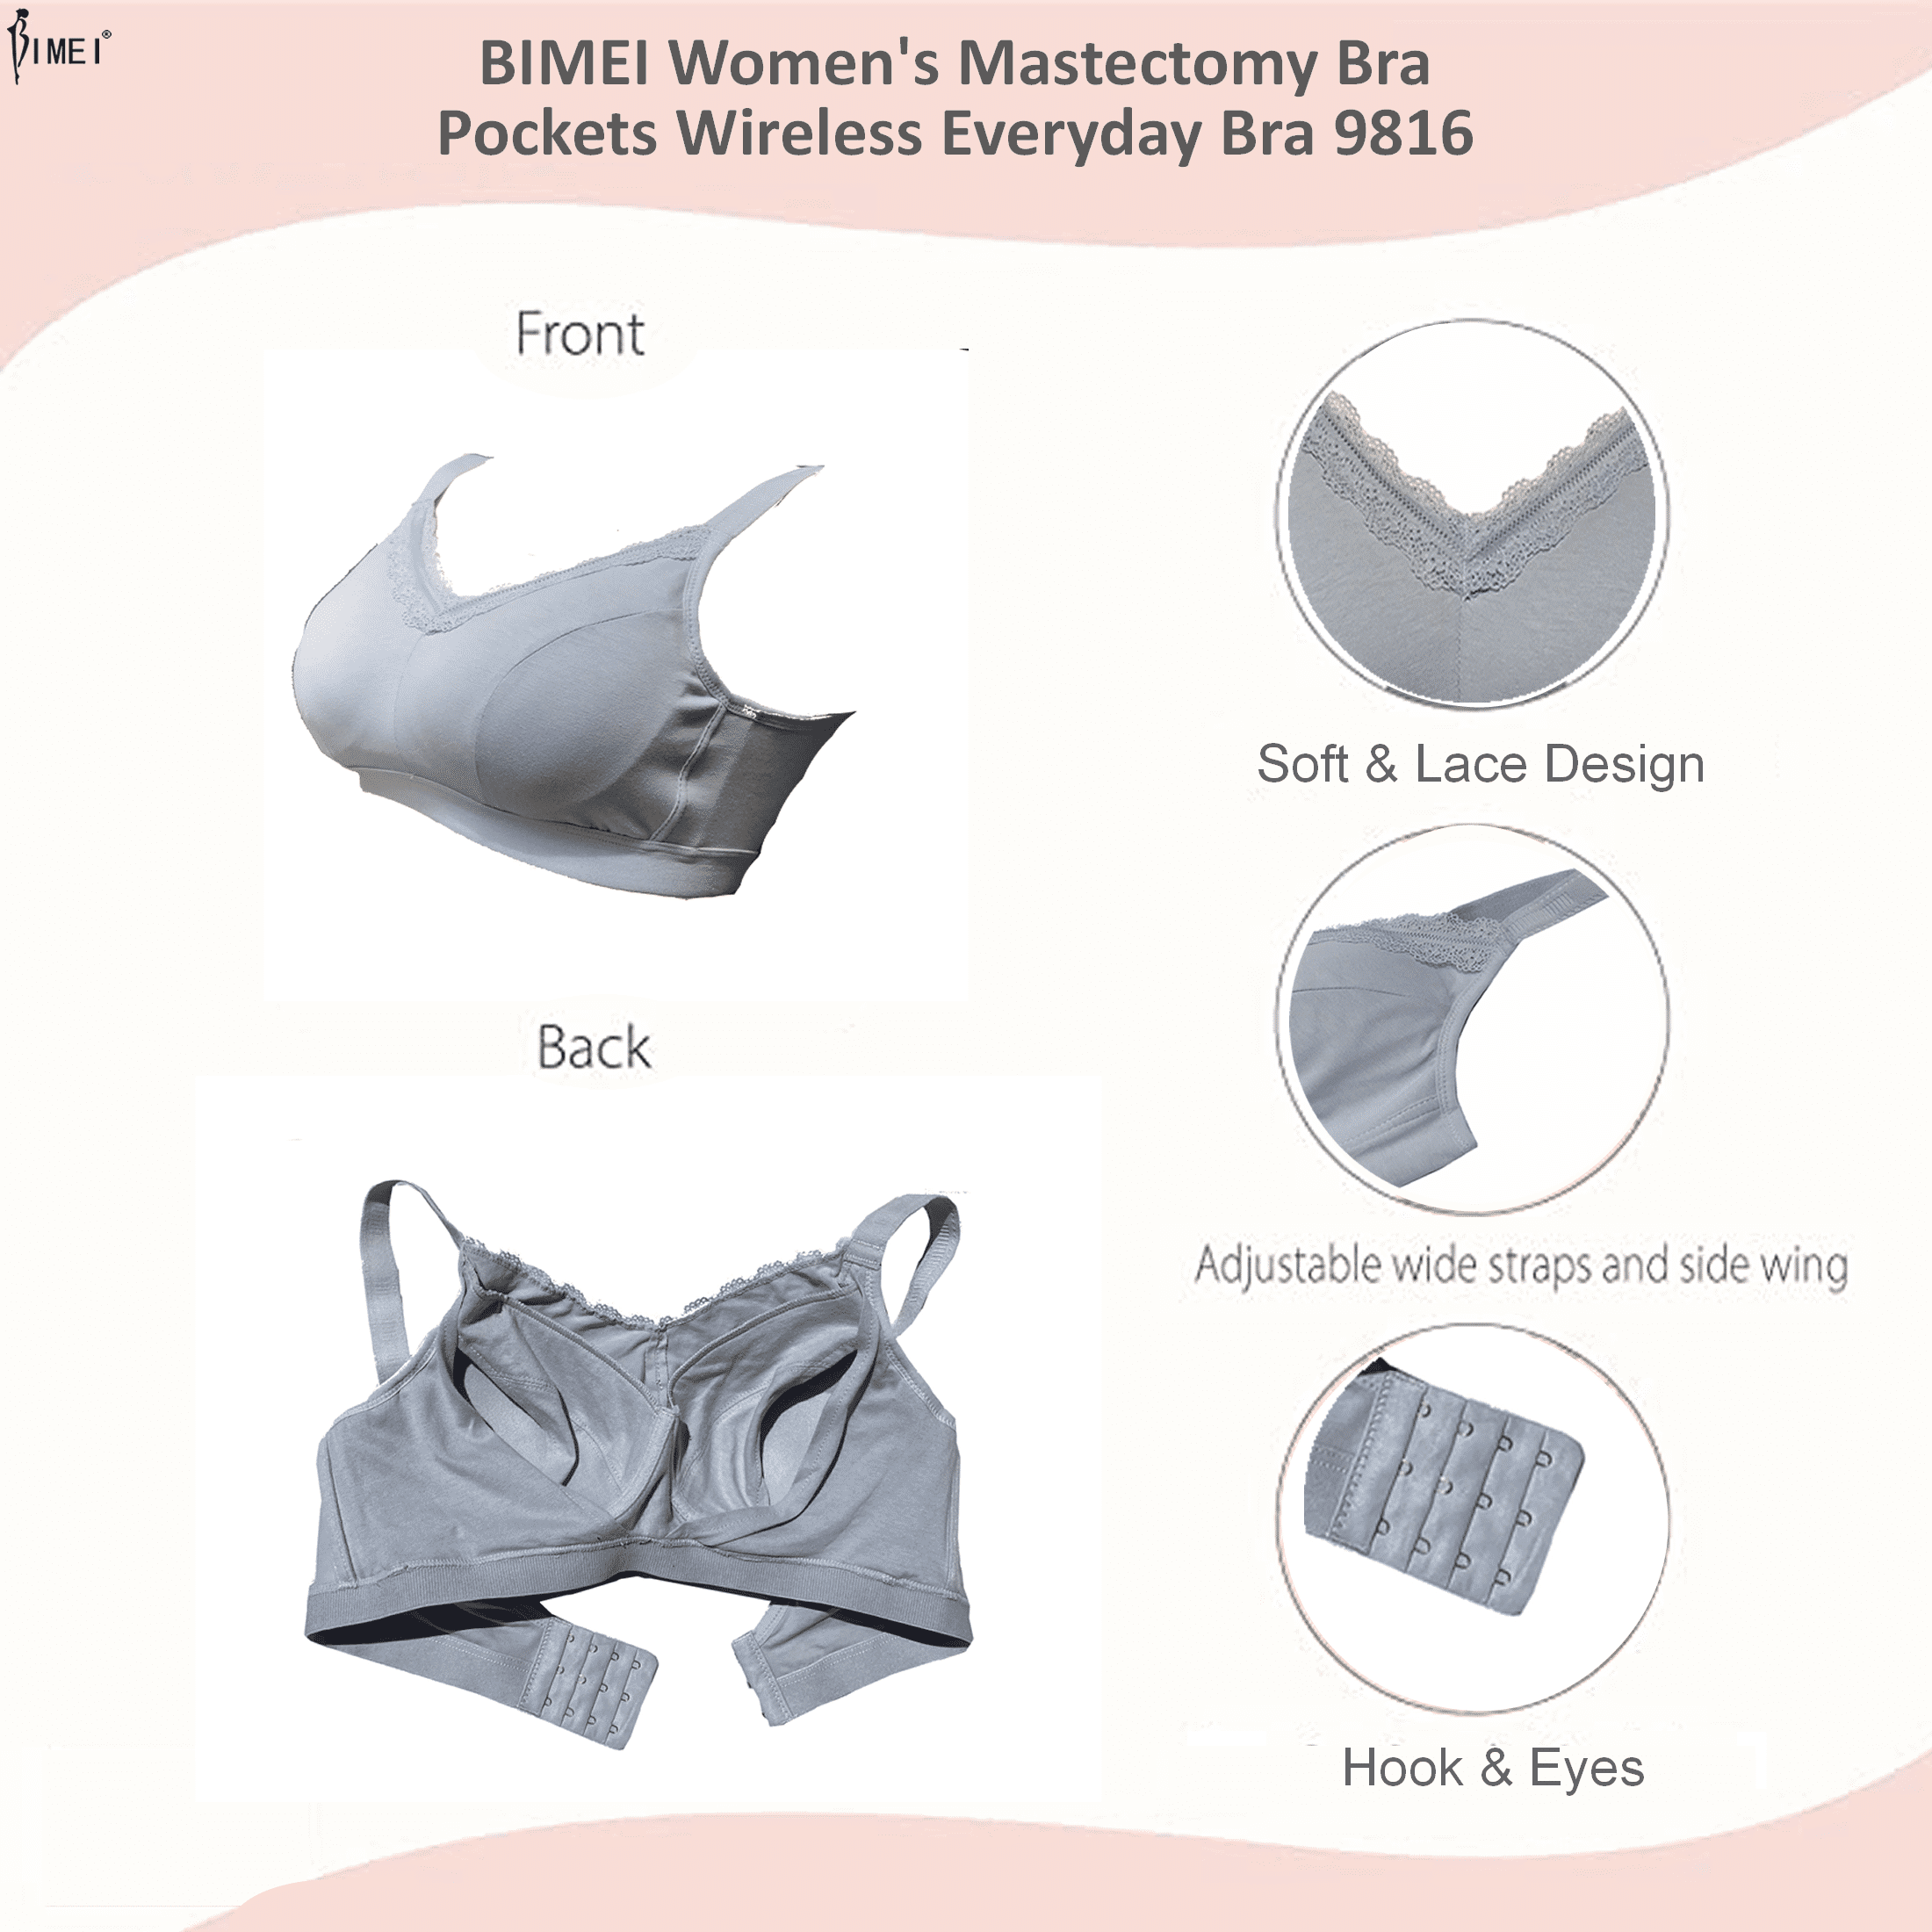 BIMEI Women's Mastectomy Bra Pockets Wireless Post-Surgery Invisible  Pockets for Breast Forms Everyday Bra Plus Size Bra 9818,Ivory White, 36C 